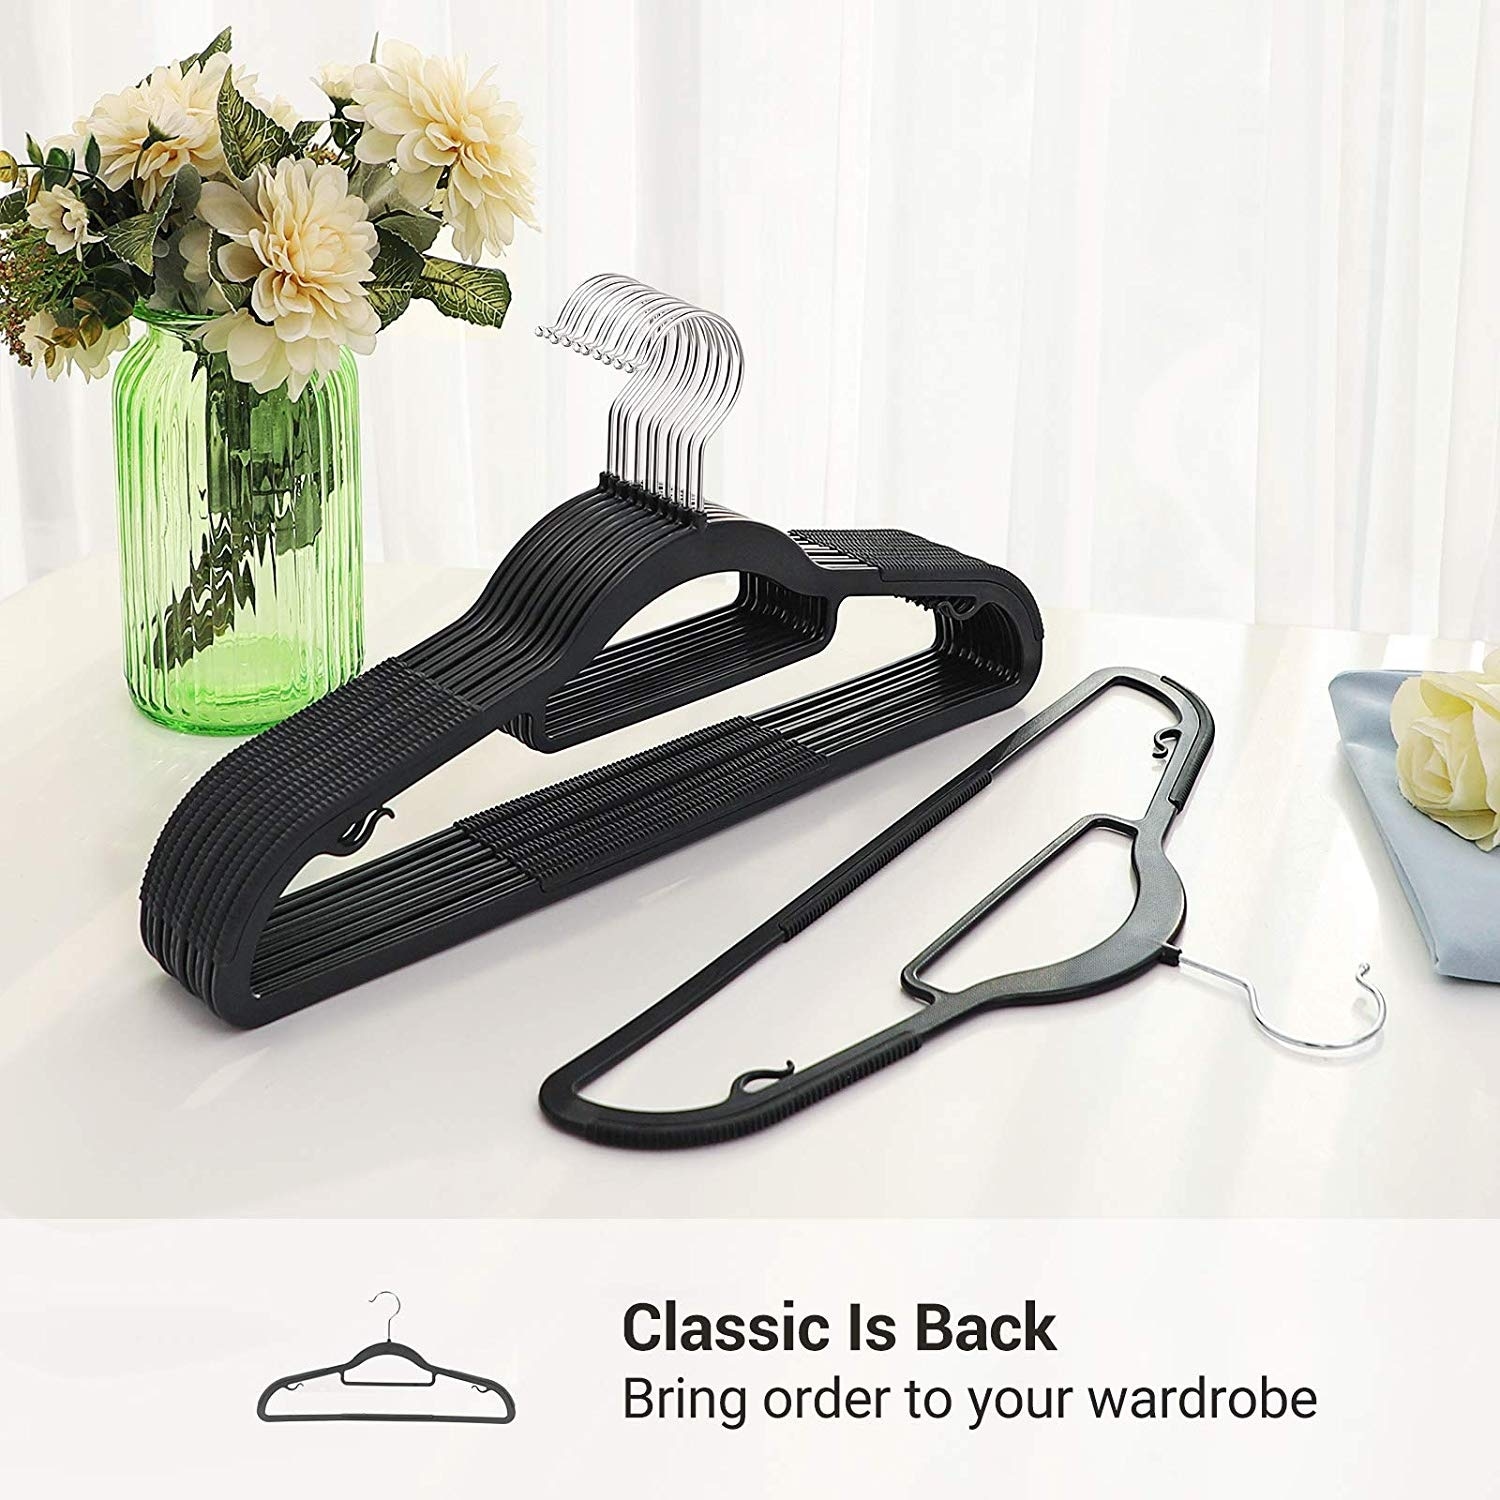 https://ak1.ostkcdn.com/images/products/is/images/direct/243128fc1151d608f5a5e168952db11bc94029ab/Pack-of-50-Coat-Hangers%2C-Heavy-Duty-Plastic-Hangers-with-Non-Slip-Design%2C-Space-Saving-Clothes-Hangers%2C-0.2-Inch-Thickness.jpg